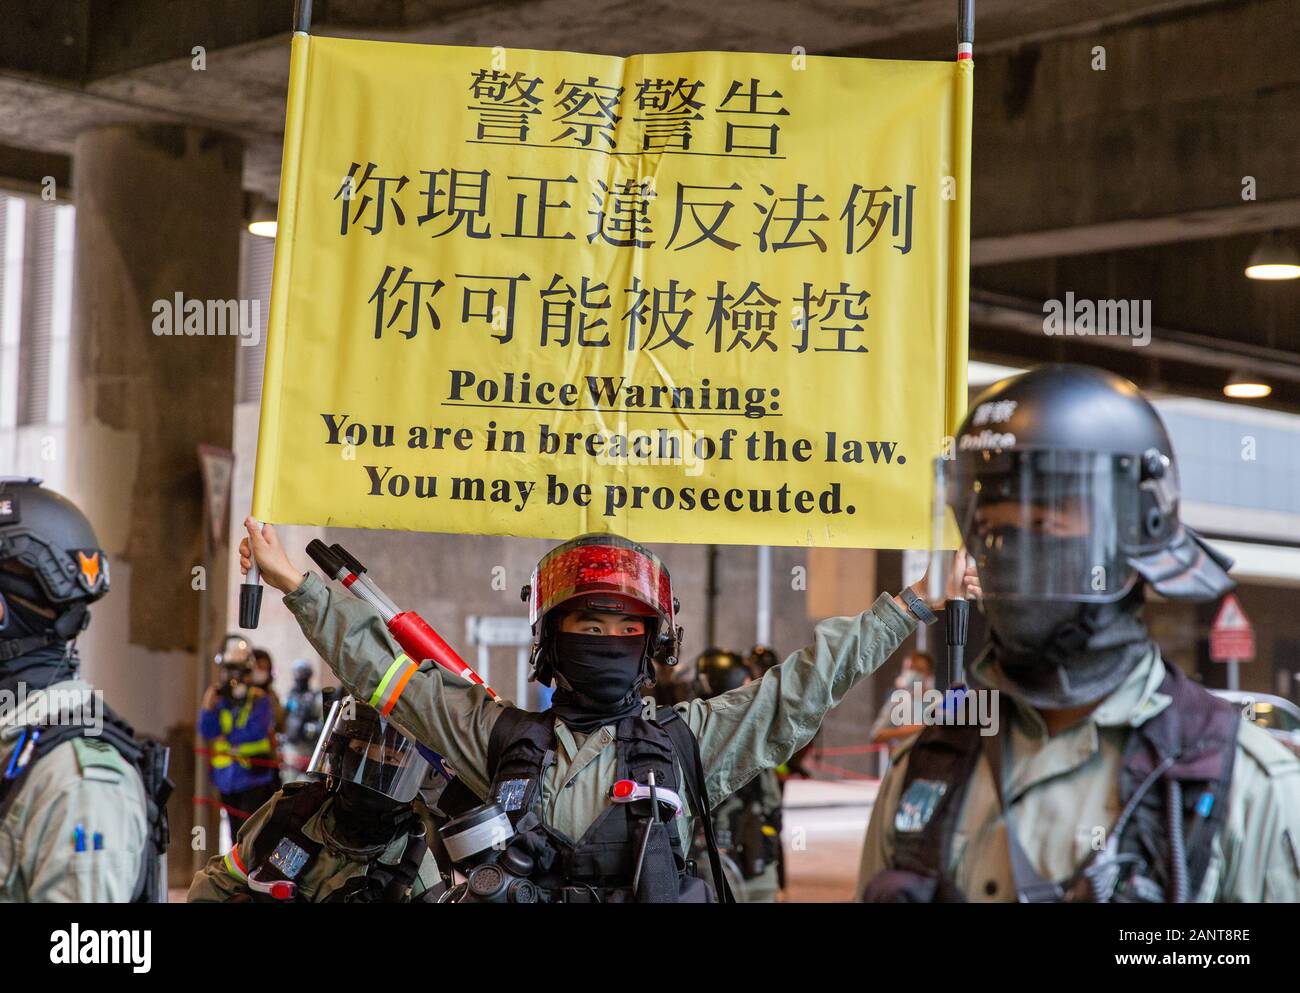 Hong Kong, China. 19th Jan, 2020. Police hold up yellow warning telling crowd to disperse. Hong Kong Protest - Universal Seige on Communists Rally at Chater Garden, Central, Hong Kong. Credit: David Ogg/Alamy Live News Stock Photo